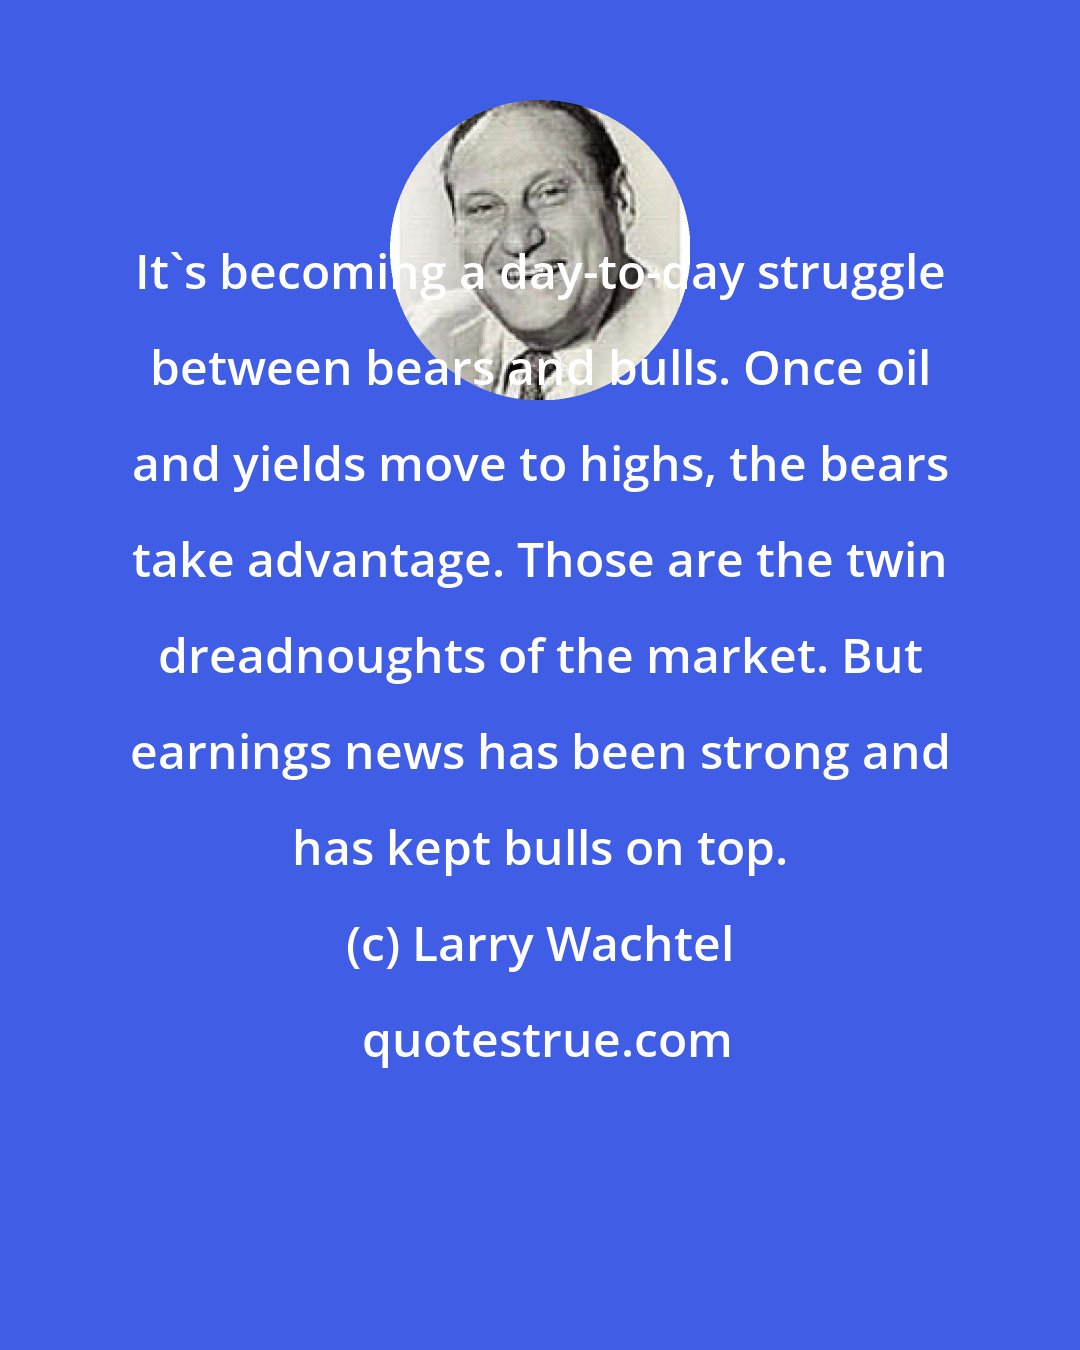 Larry Wachtel: It's becoming a day-to-day struggle between bears and bulls. Once oil and yields move to highs, the bears take advantage. Those are the twin dreadnoughts of the market. But earnings news has been strong and has kept bulls on top.